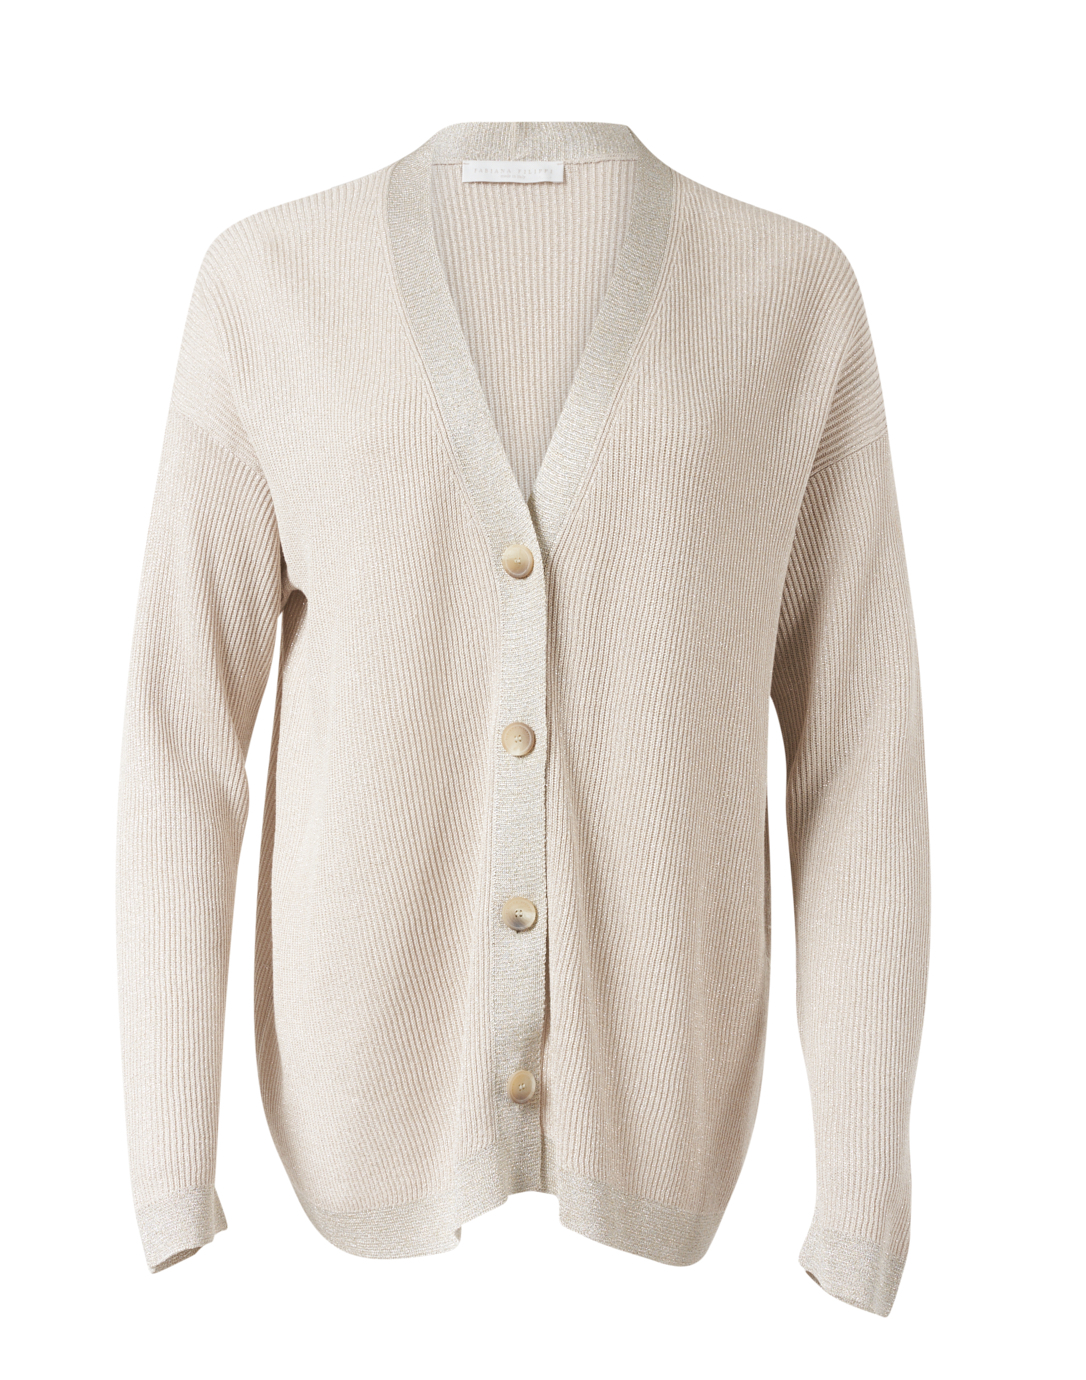 Womens Clothing Jumpers and knitwear Cardigans Fabiana Filippi Cashmere Sleeveless Cardigan in White 